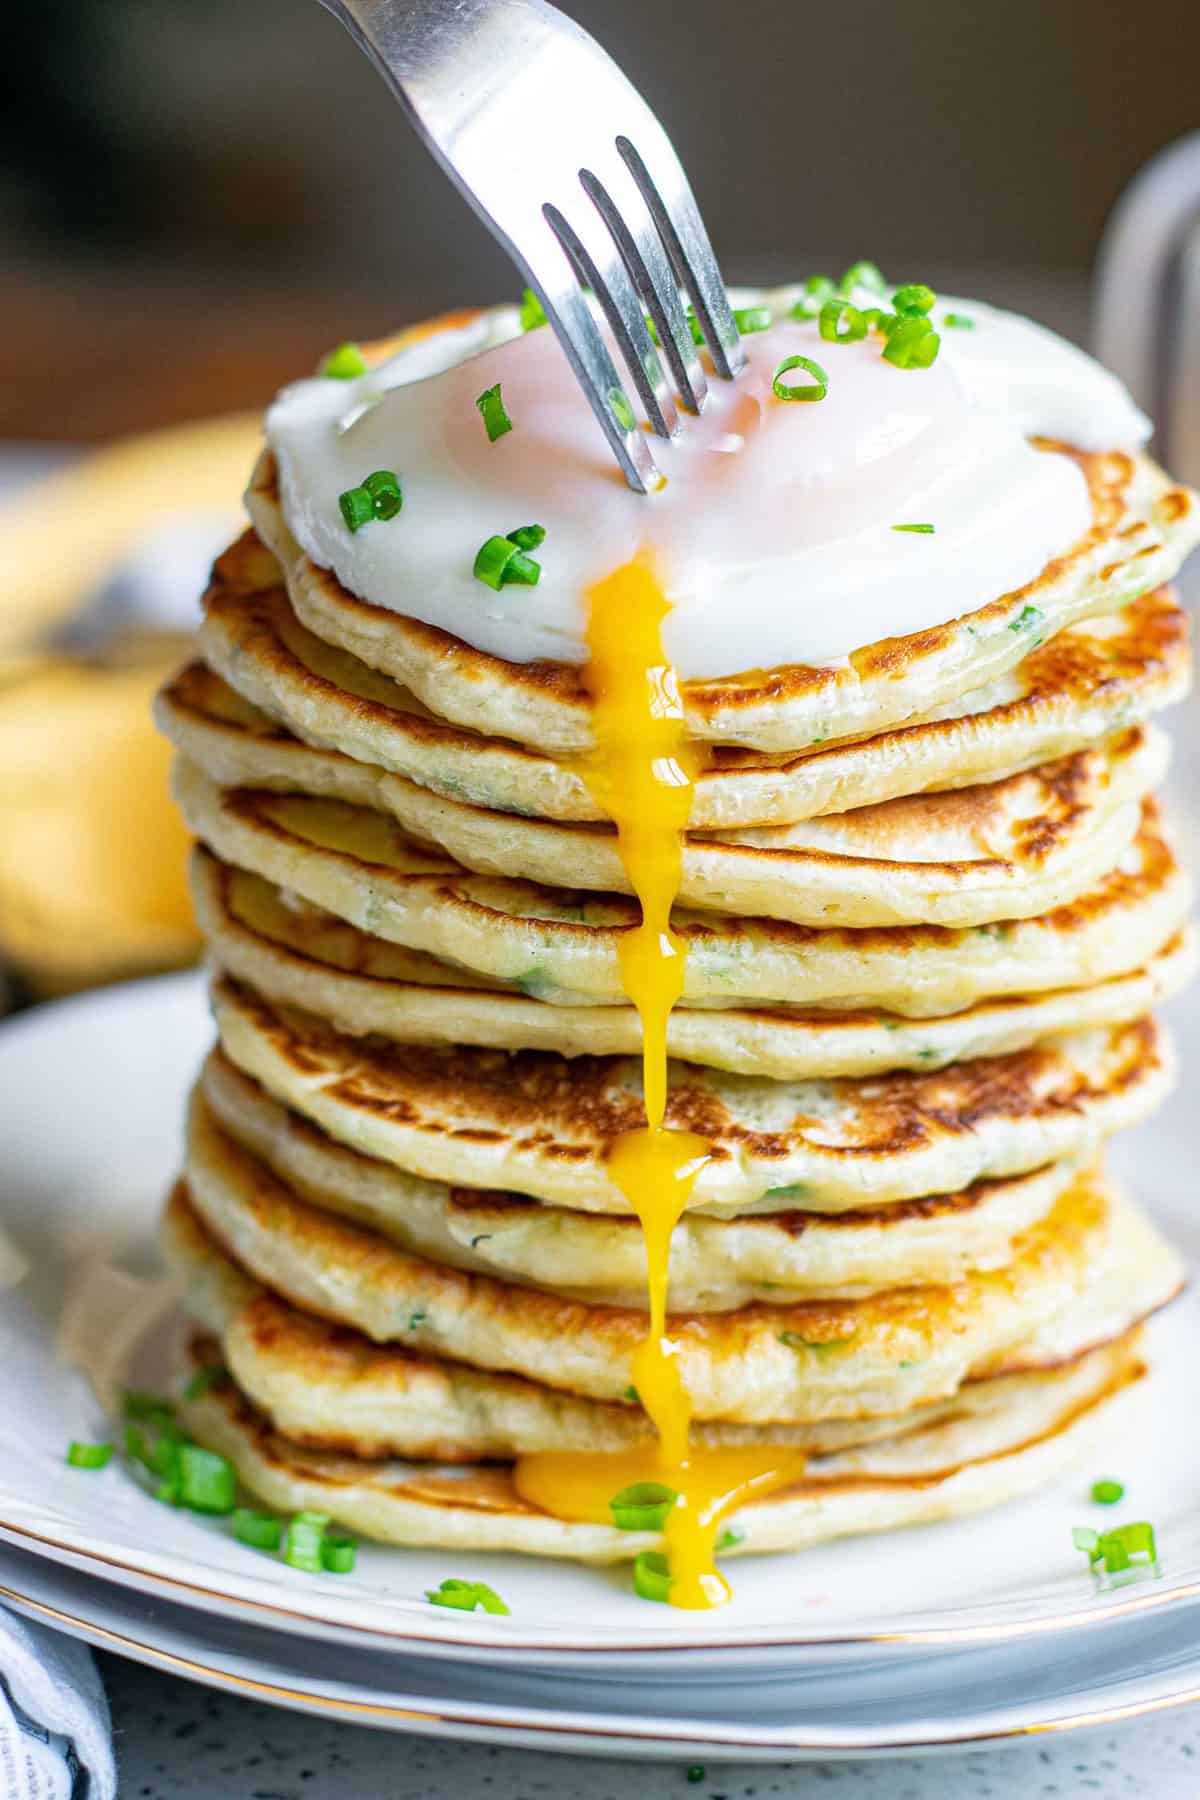 A fork stabbing an egg atop a stack of pancakes, yolk running down the side.